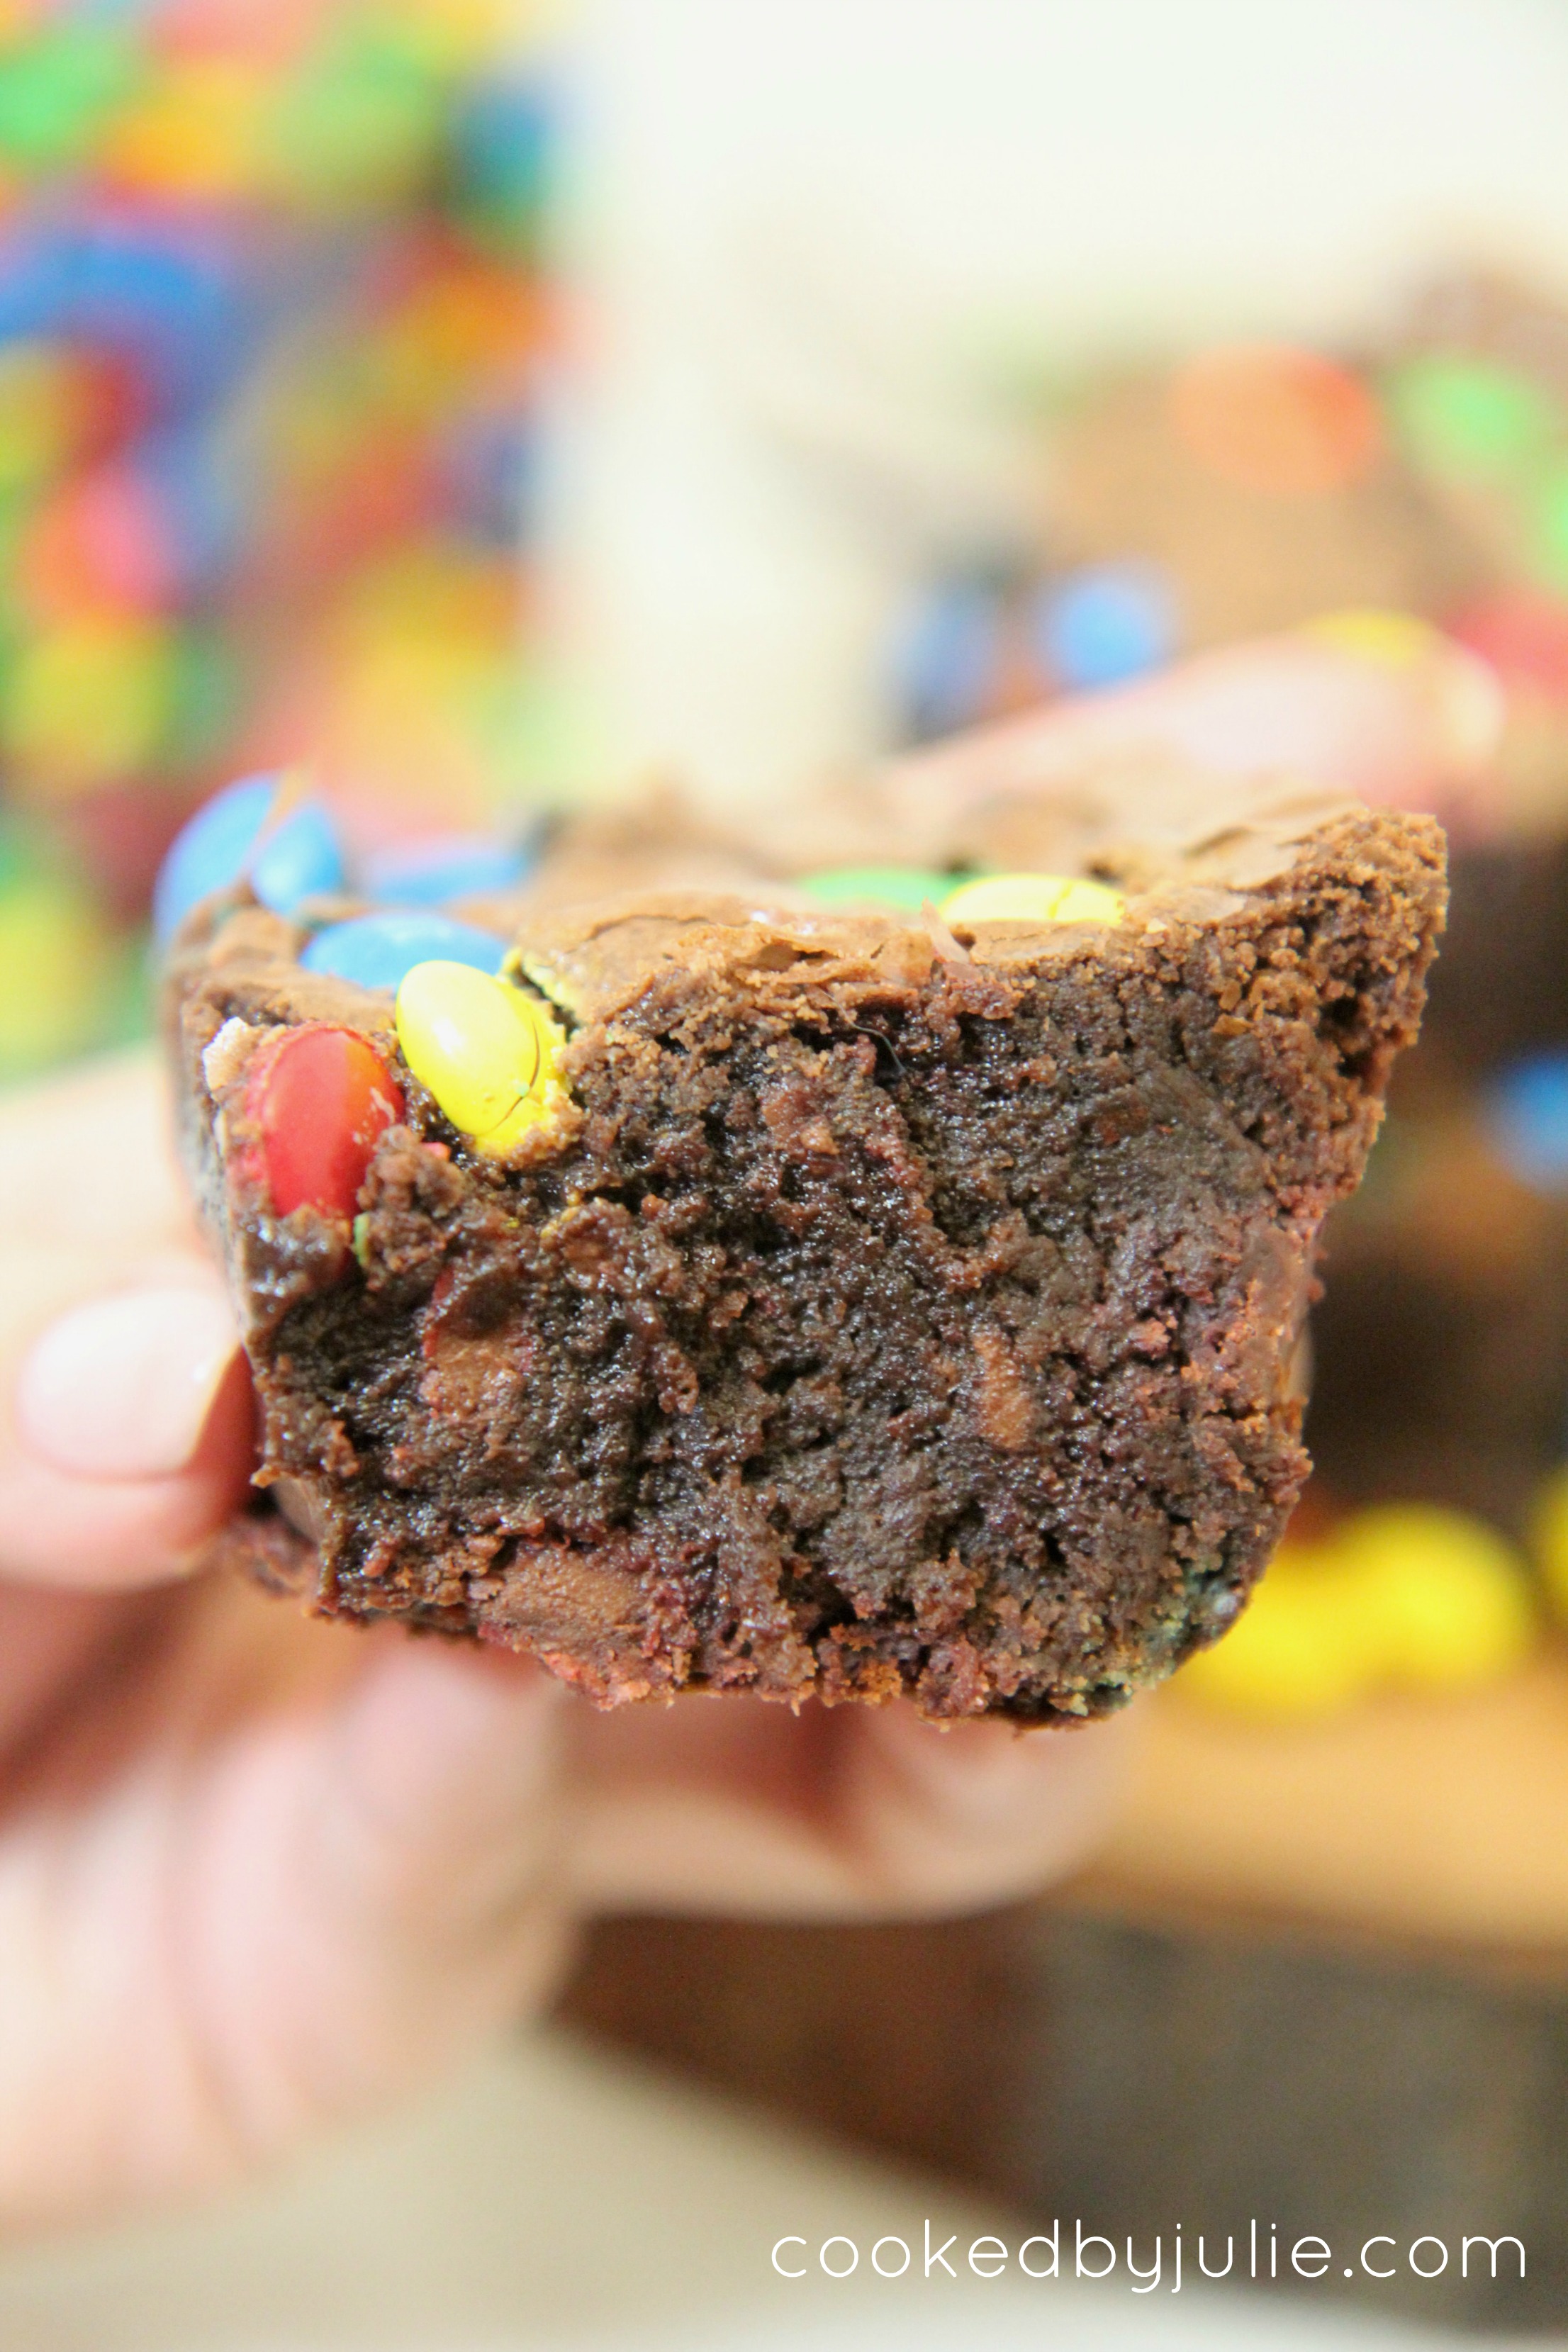 These fudgy chocolate brownies are perfectly baked with M&M pieces in every bite